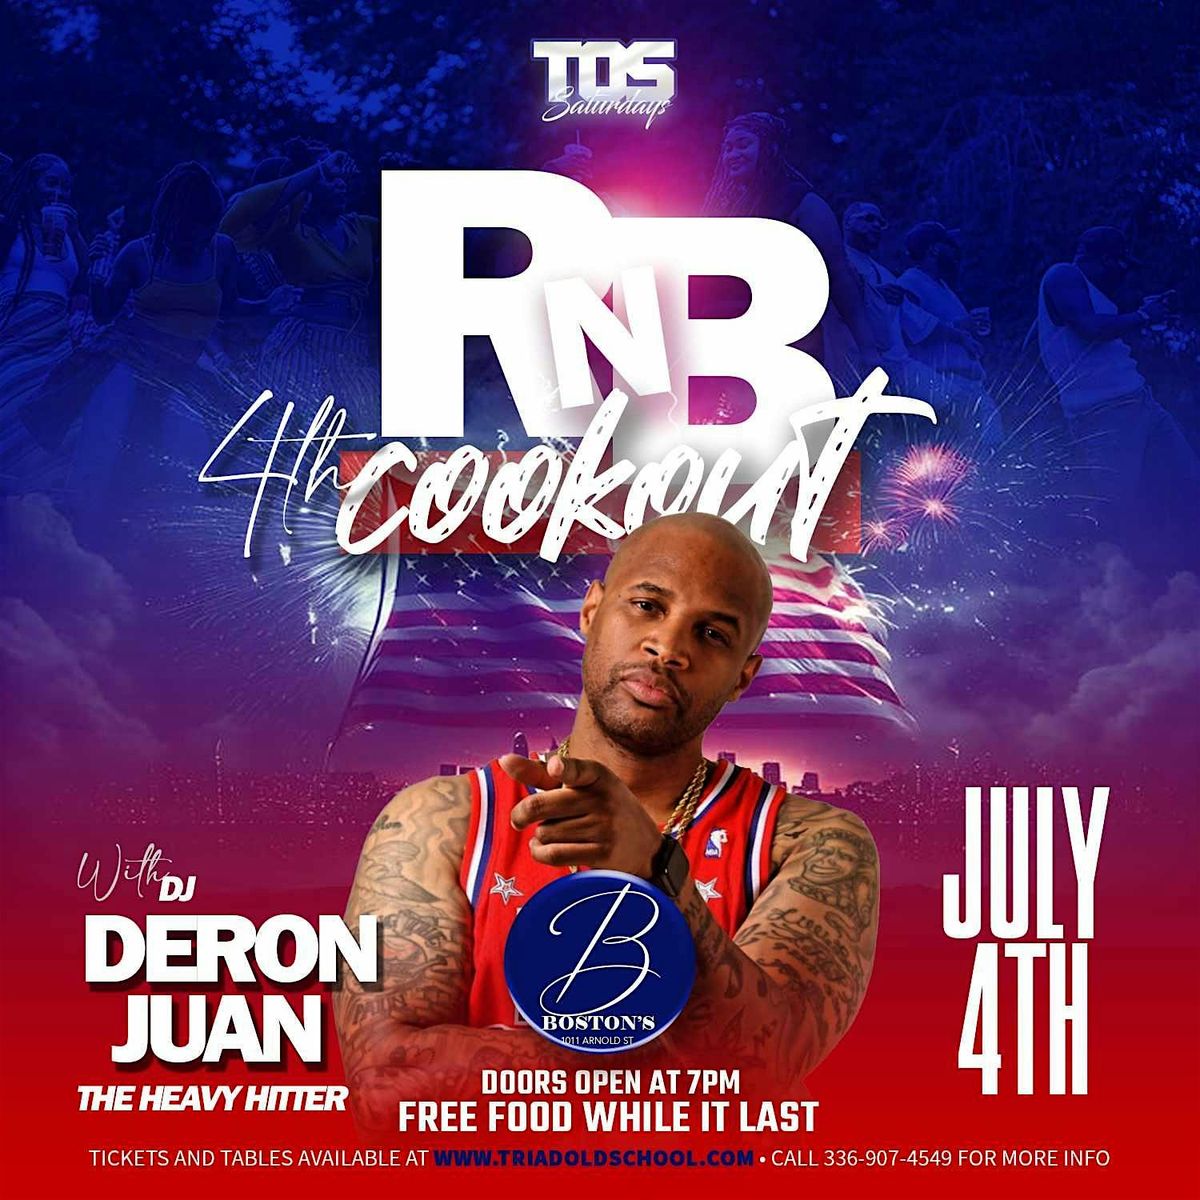 THE TOS RnB COOKOUT ON THE 4TH!